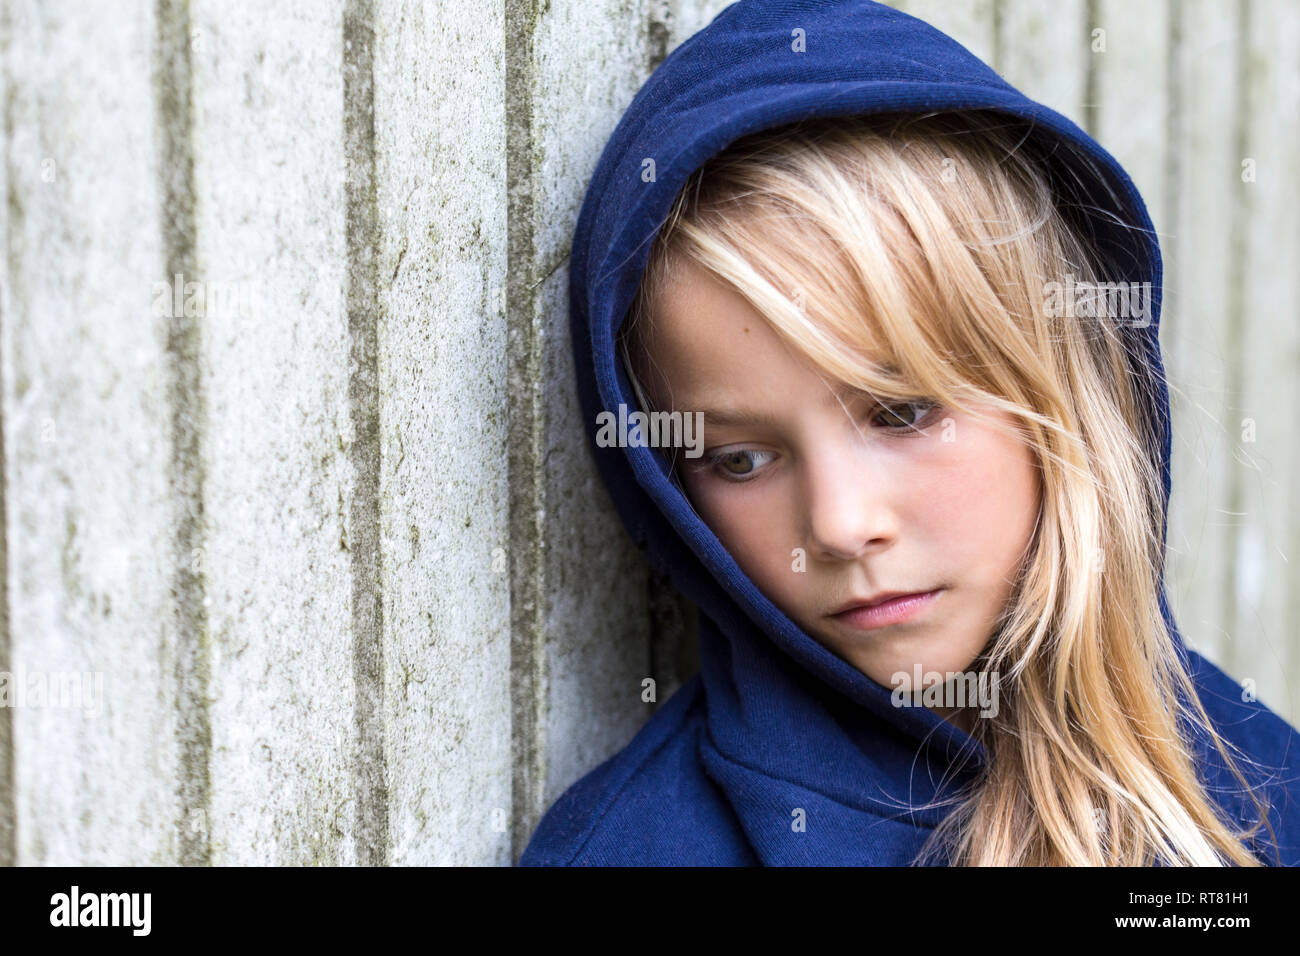 Portrait of sad blond girl wearing blue hooded jacket leaning against wooden wall Stock Photo